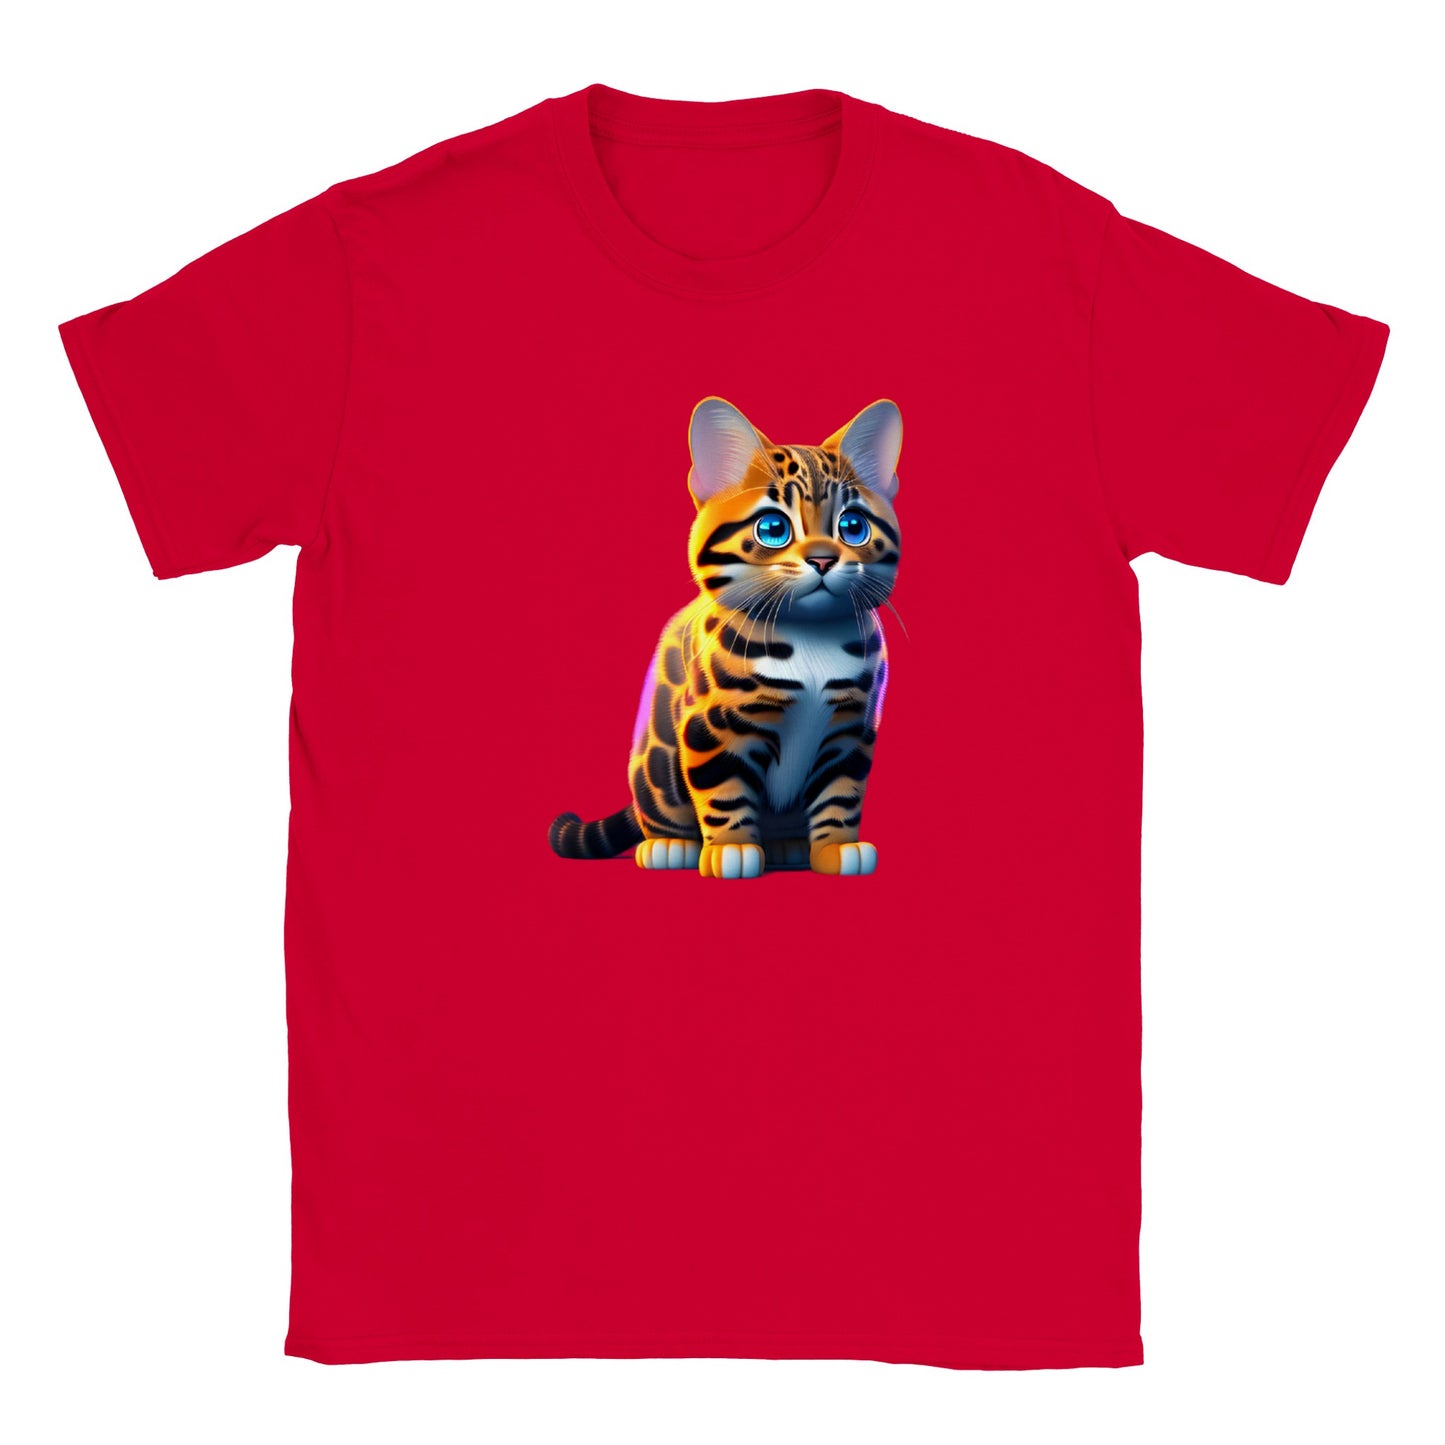 Adorable, Cool, Cute Cats and Kittens Toy - Classic Kids Crewneck T-Shirt 44